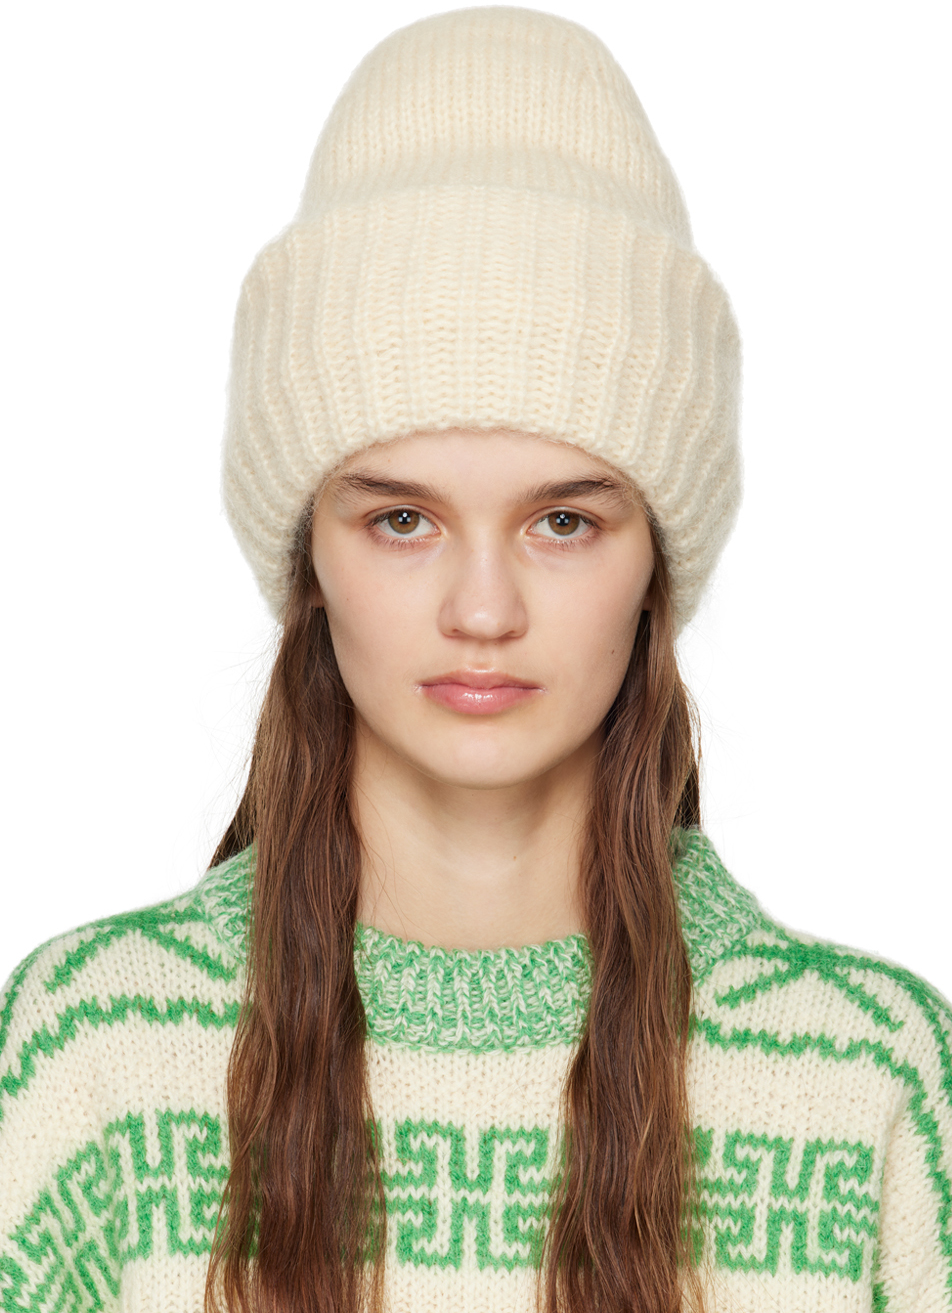 SSENSE Exclusive Off-White Beanie by Teurn Studios on Sale